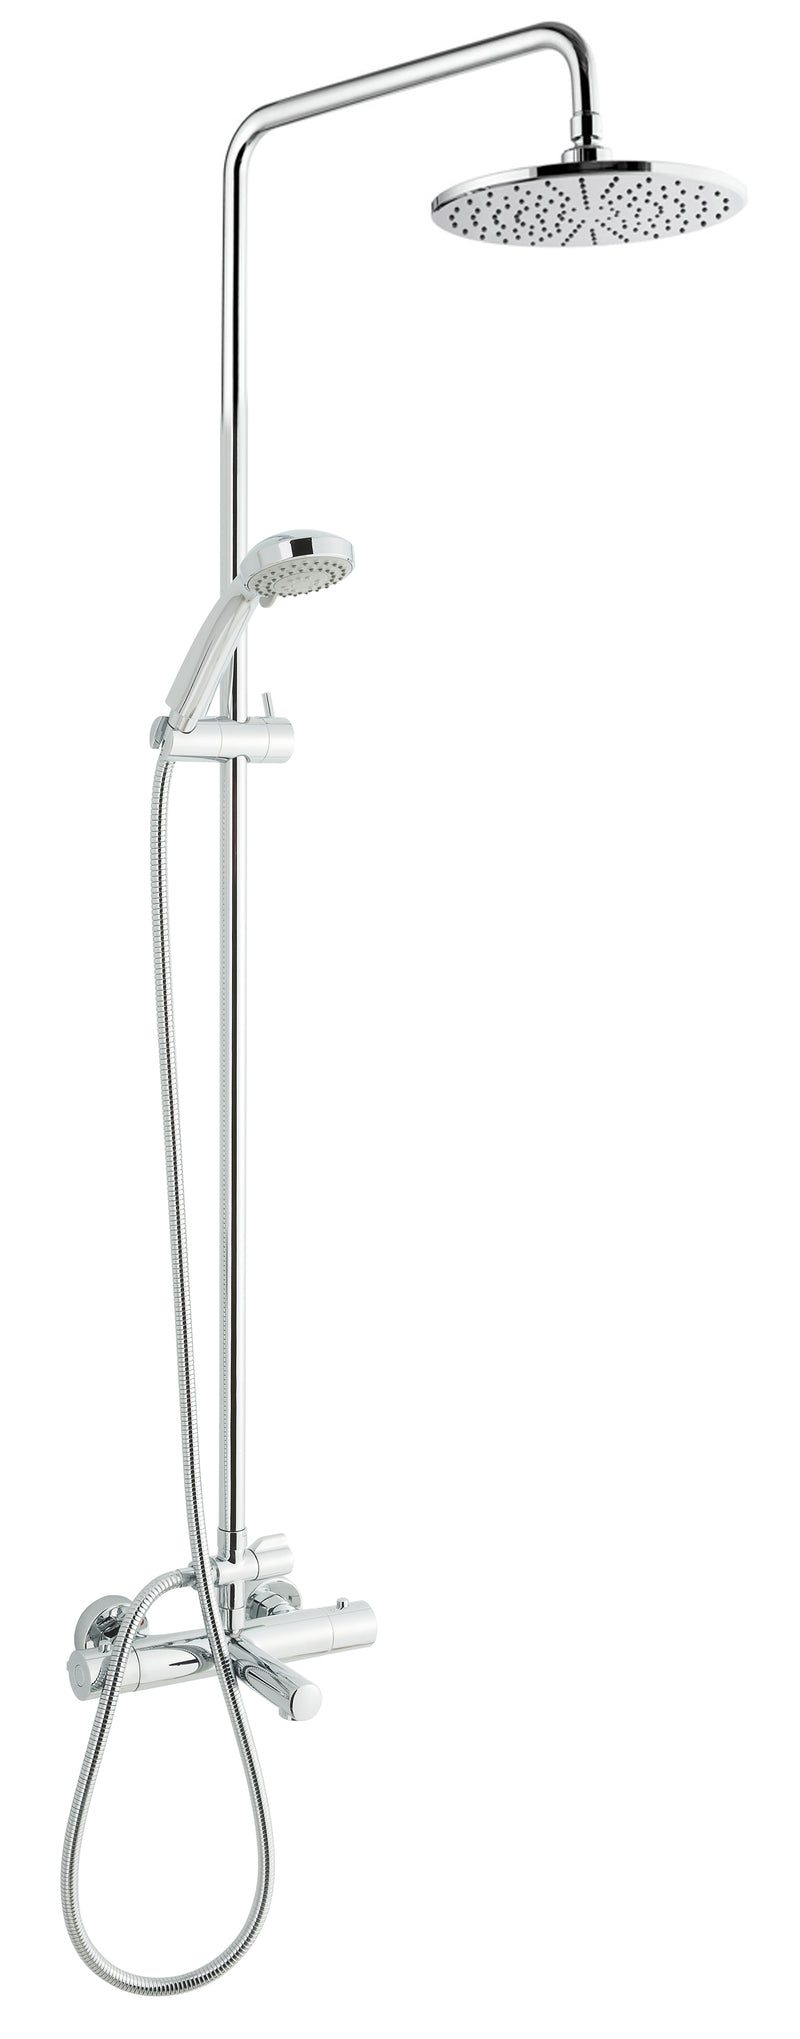 Thermostatic Shower Pole with Overhead Shower Hand Shower and Bath Spout [1275]